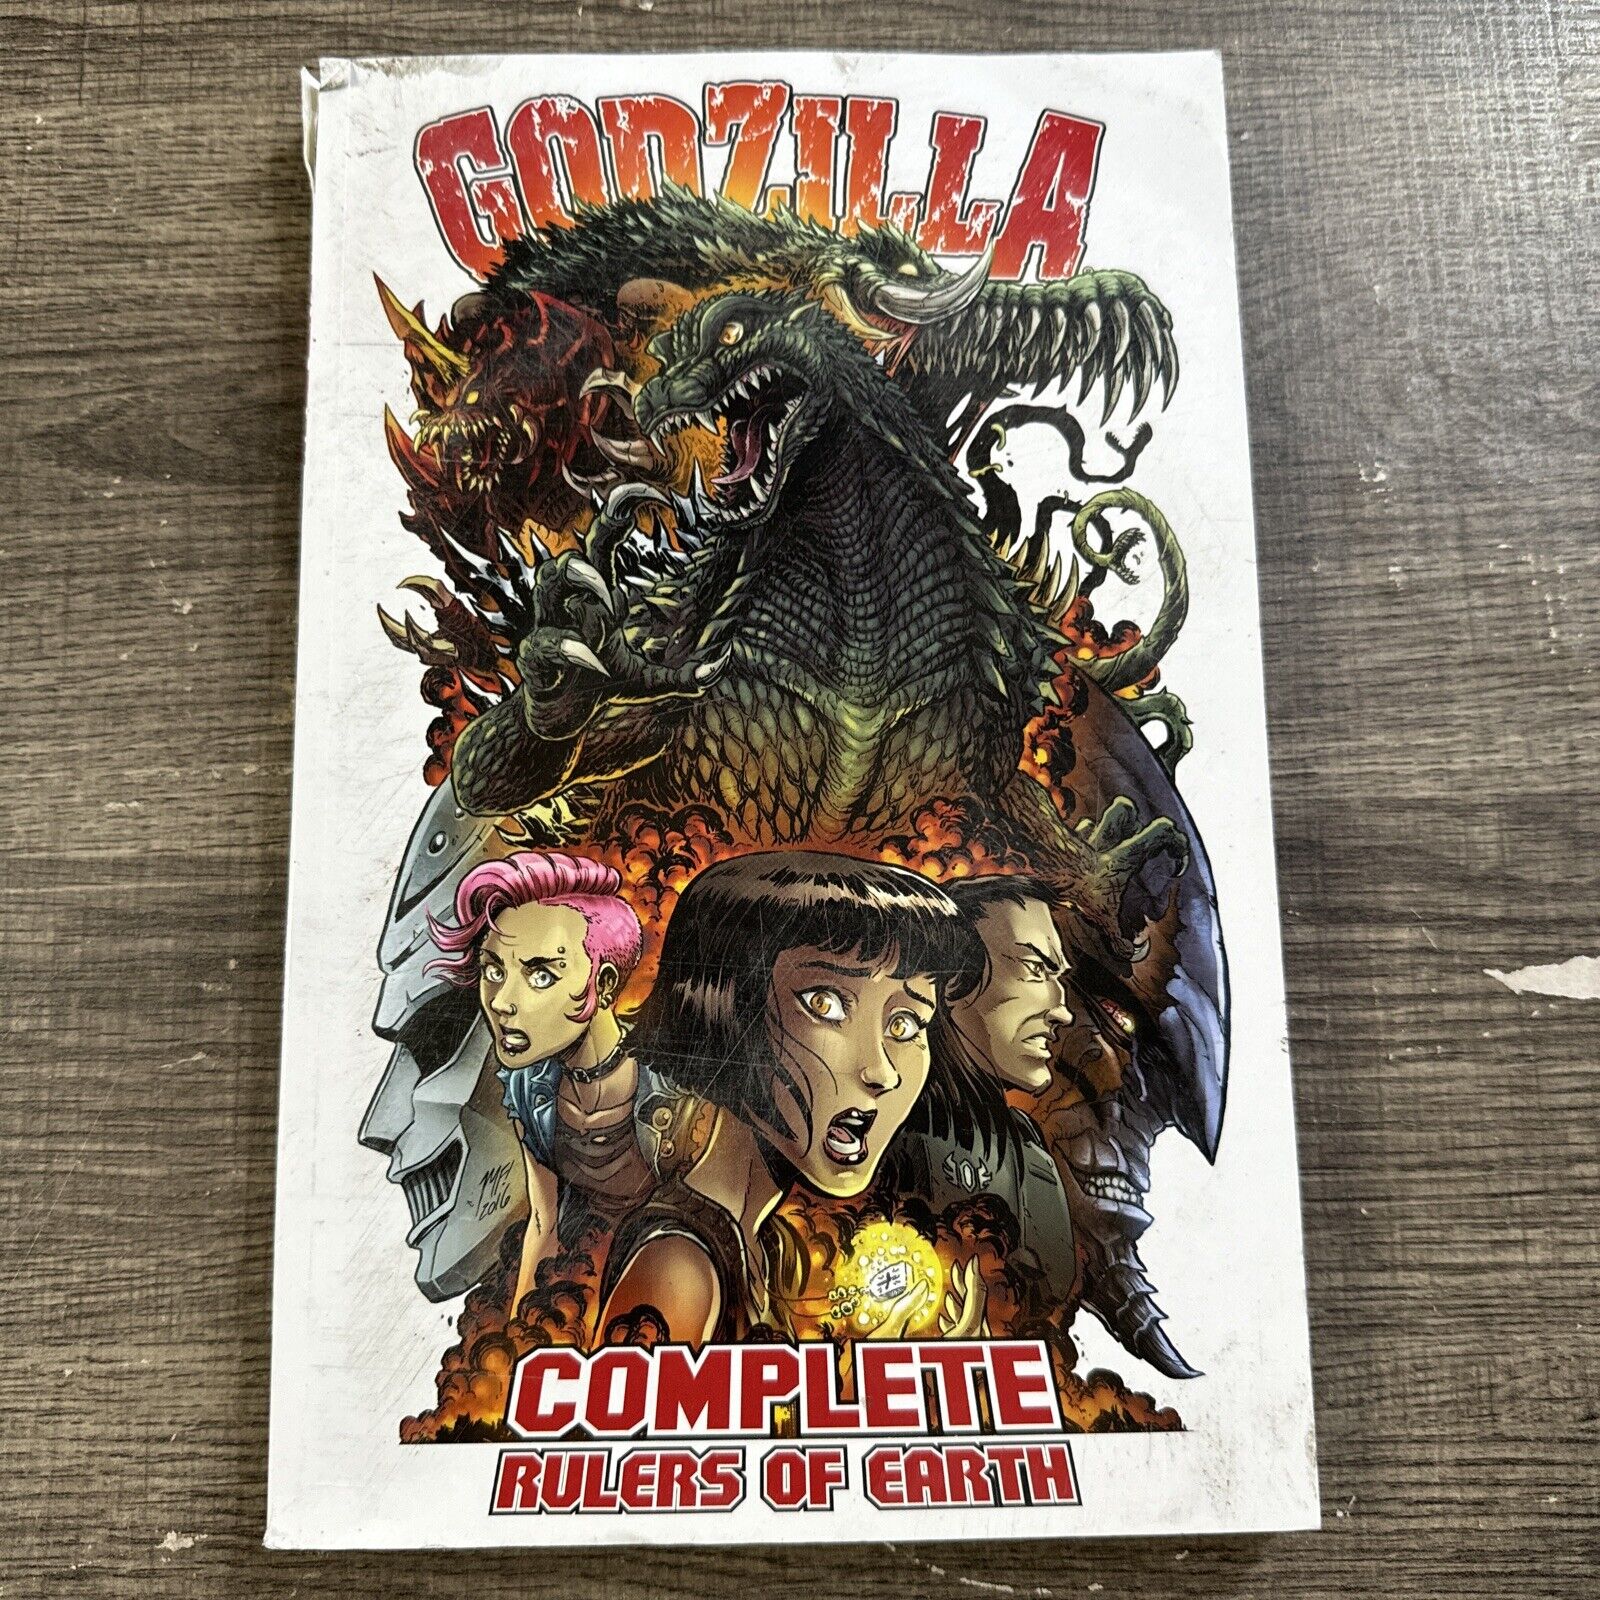 Godzilla: Complete Rulers of Earth - Paperback, by Mowry Chris - Very Good